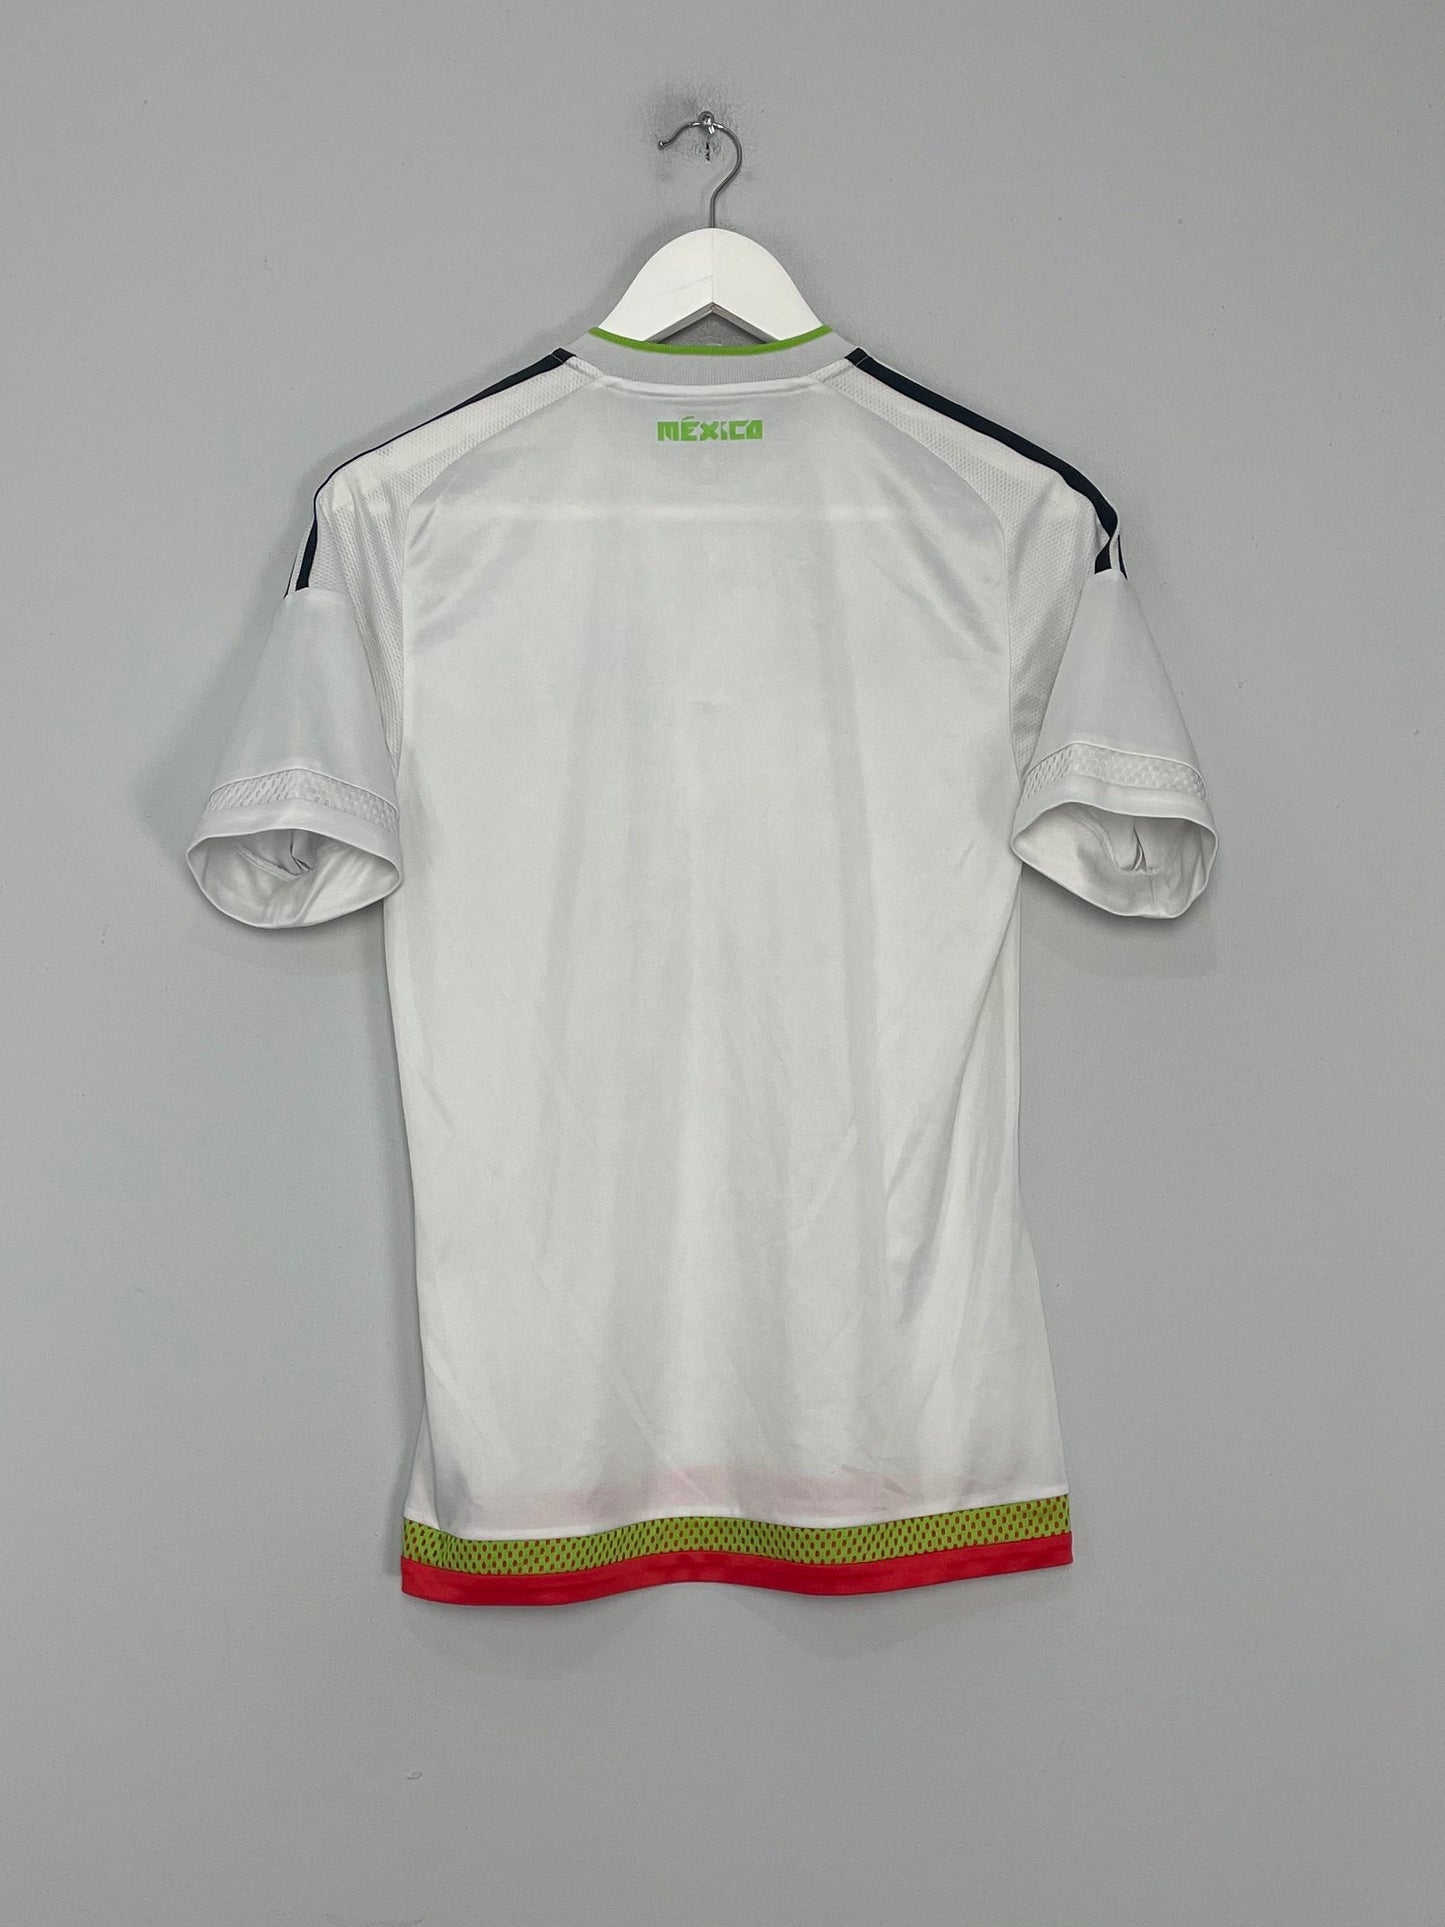 2015/16 MEXICO *PLAYER ISSUE* AWAY SHIRT (S) ADIDAS